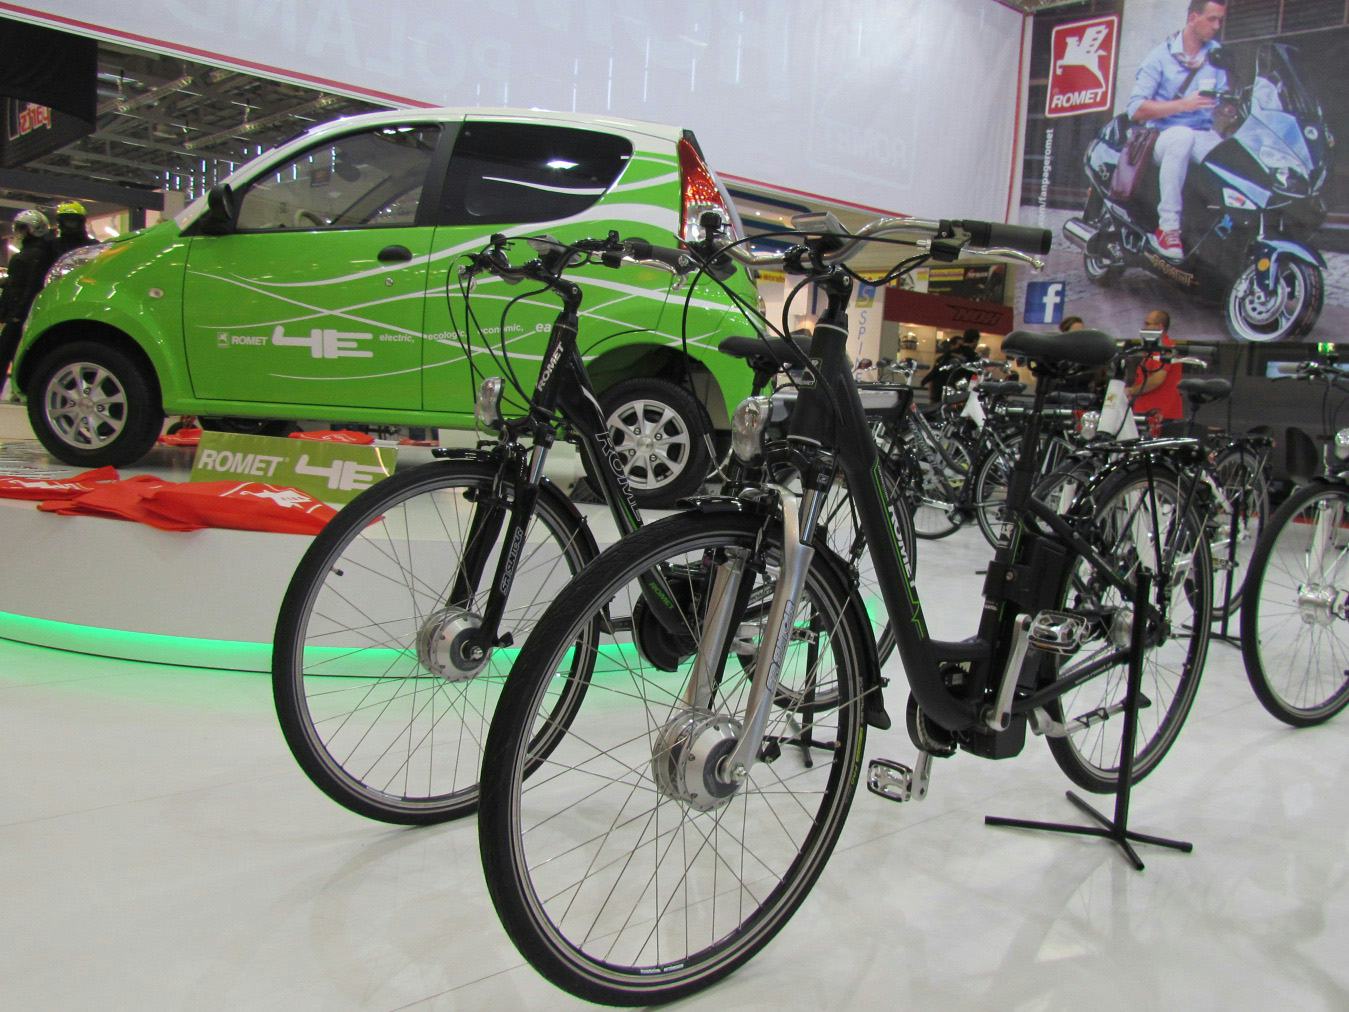 Established in 1948, Arkus & Romet is nowadays successfully involved in electric mobility with small cars, motorcycles and bikes. – Photo Bike Europe